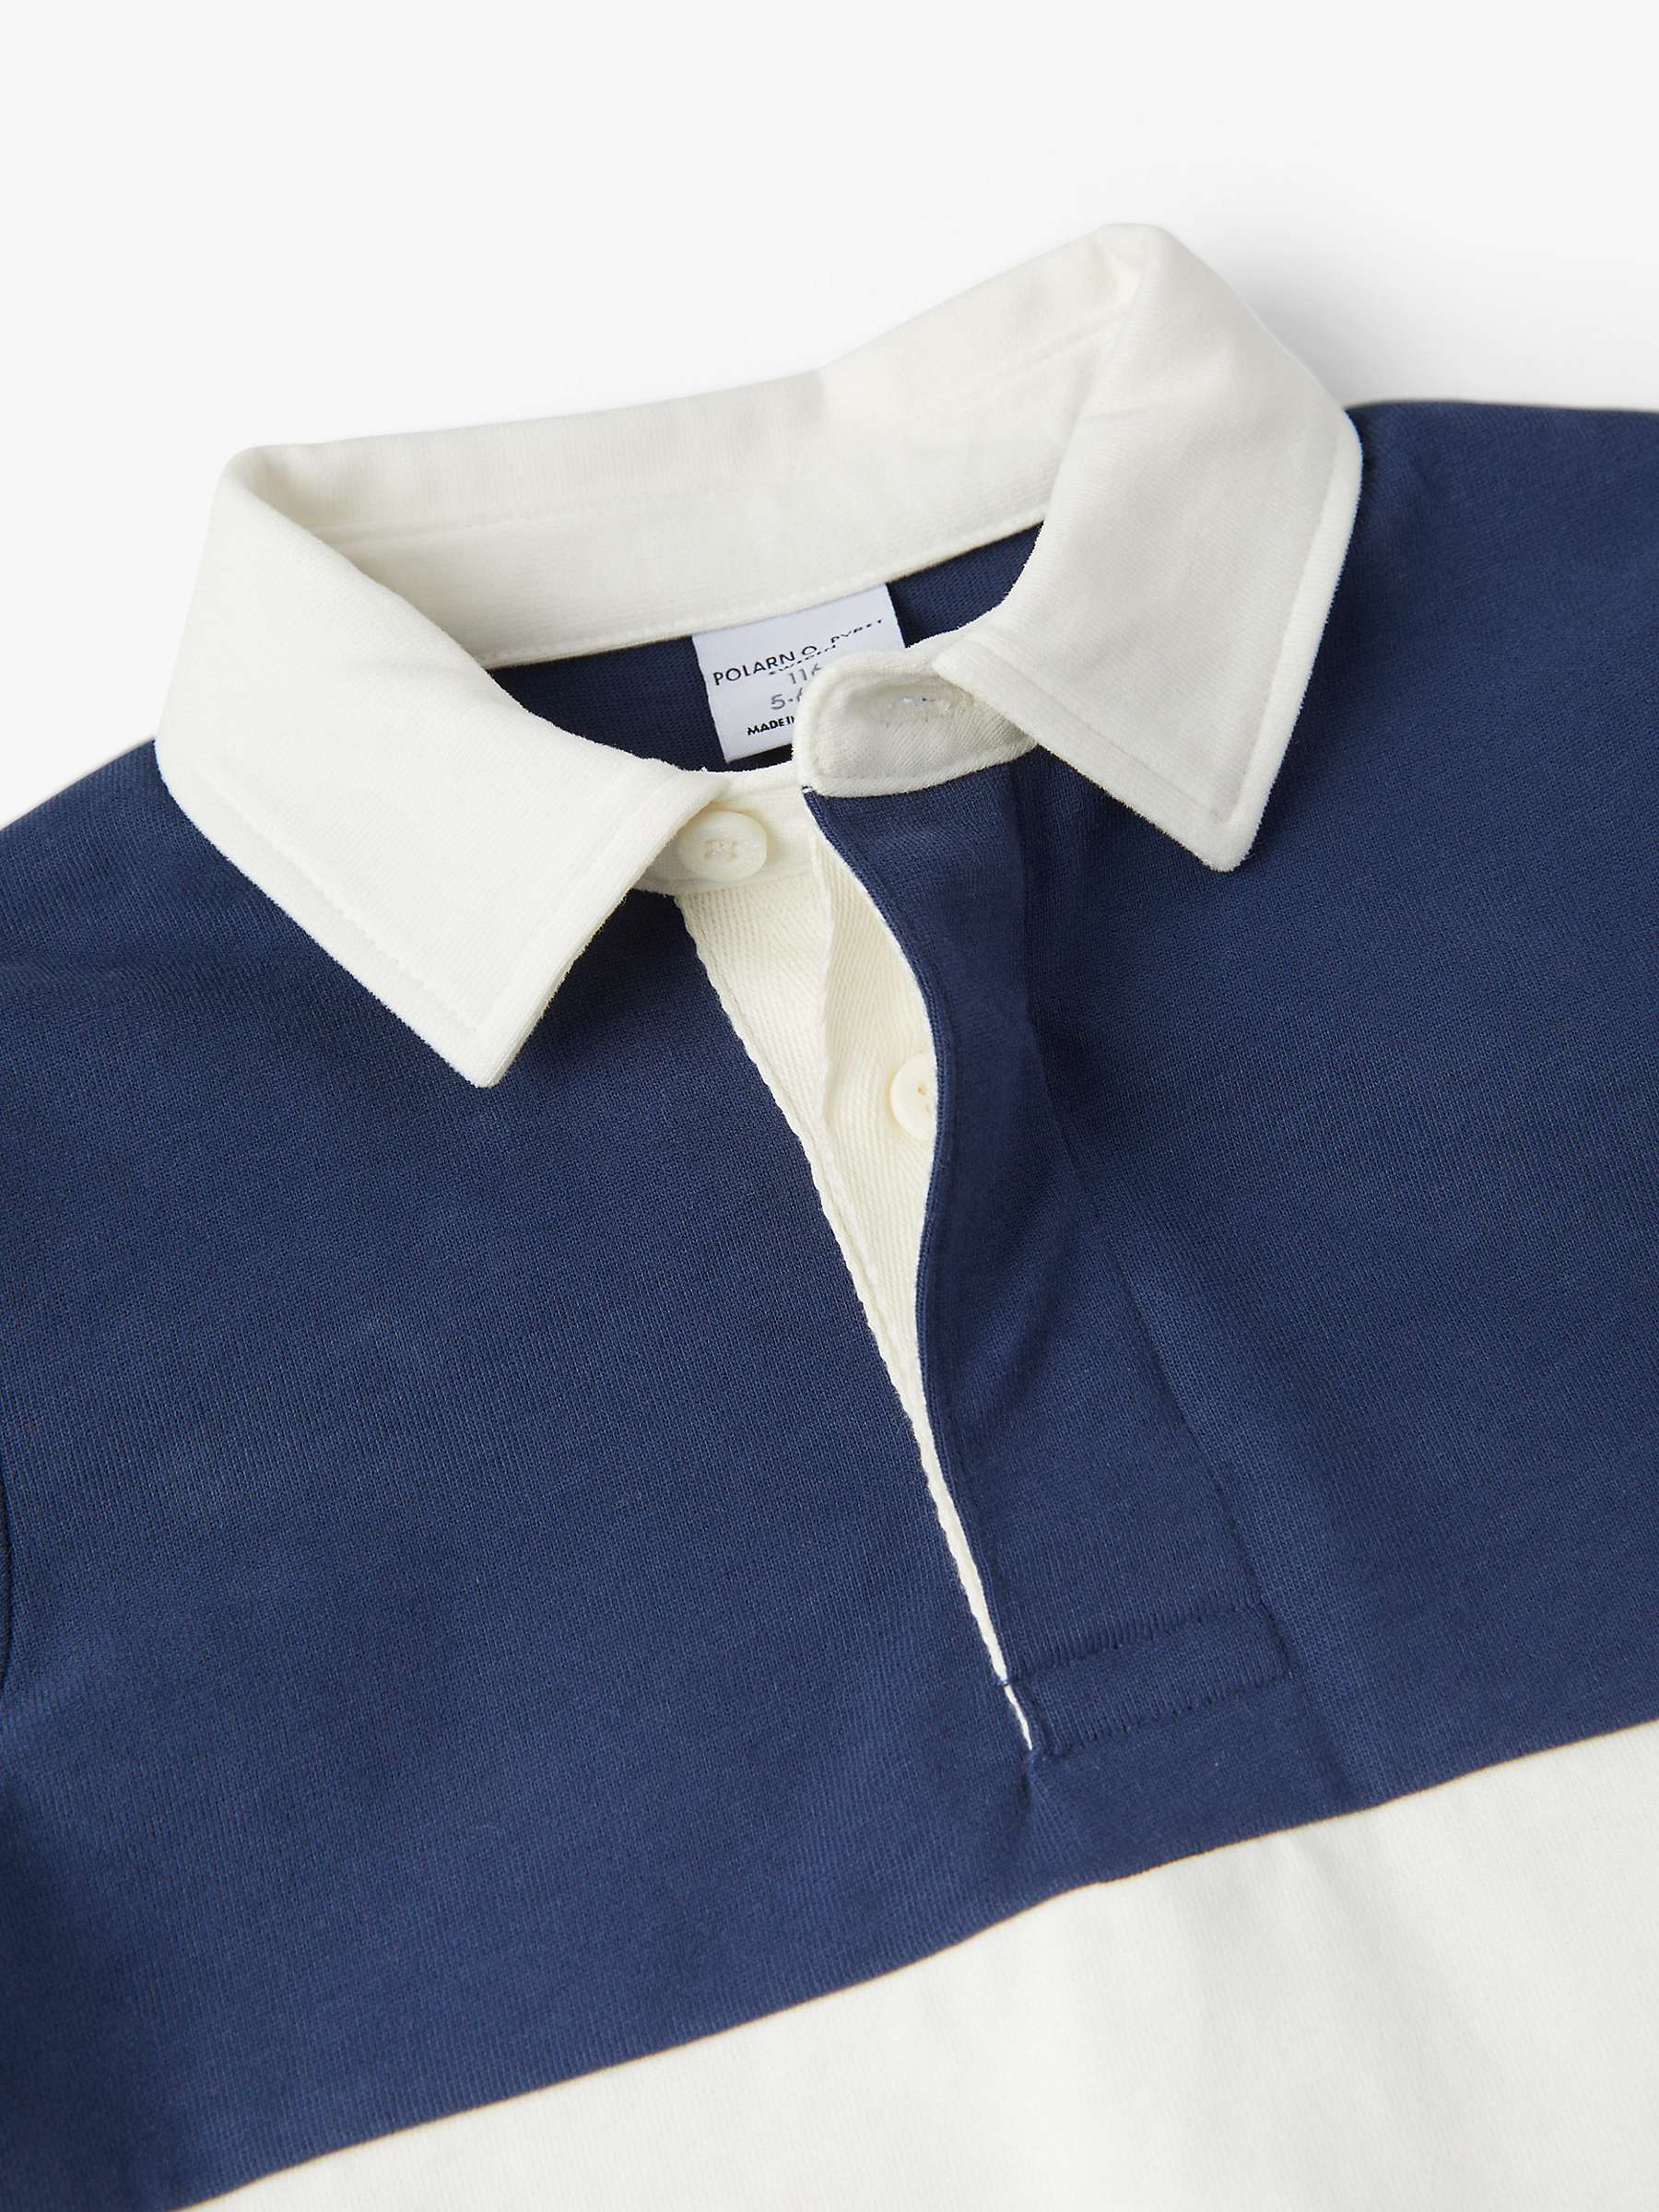 Buy Polarn O. Pyret Kids' Organic Cotton Colour Block Rugby Top, Blue Online at johnlewis.com